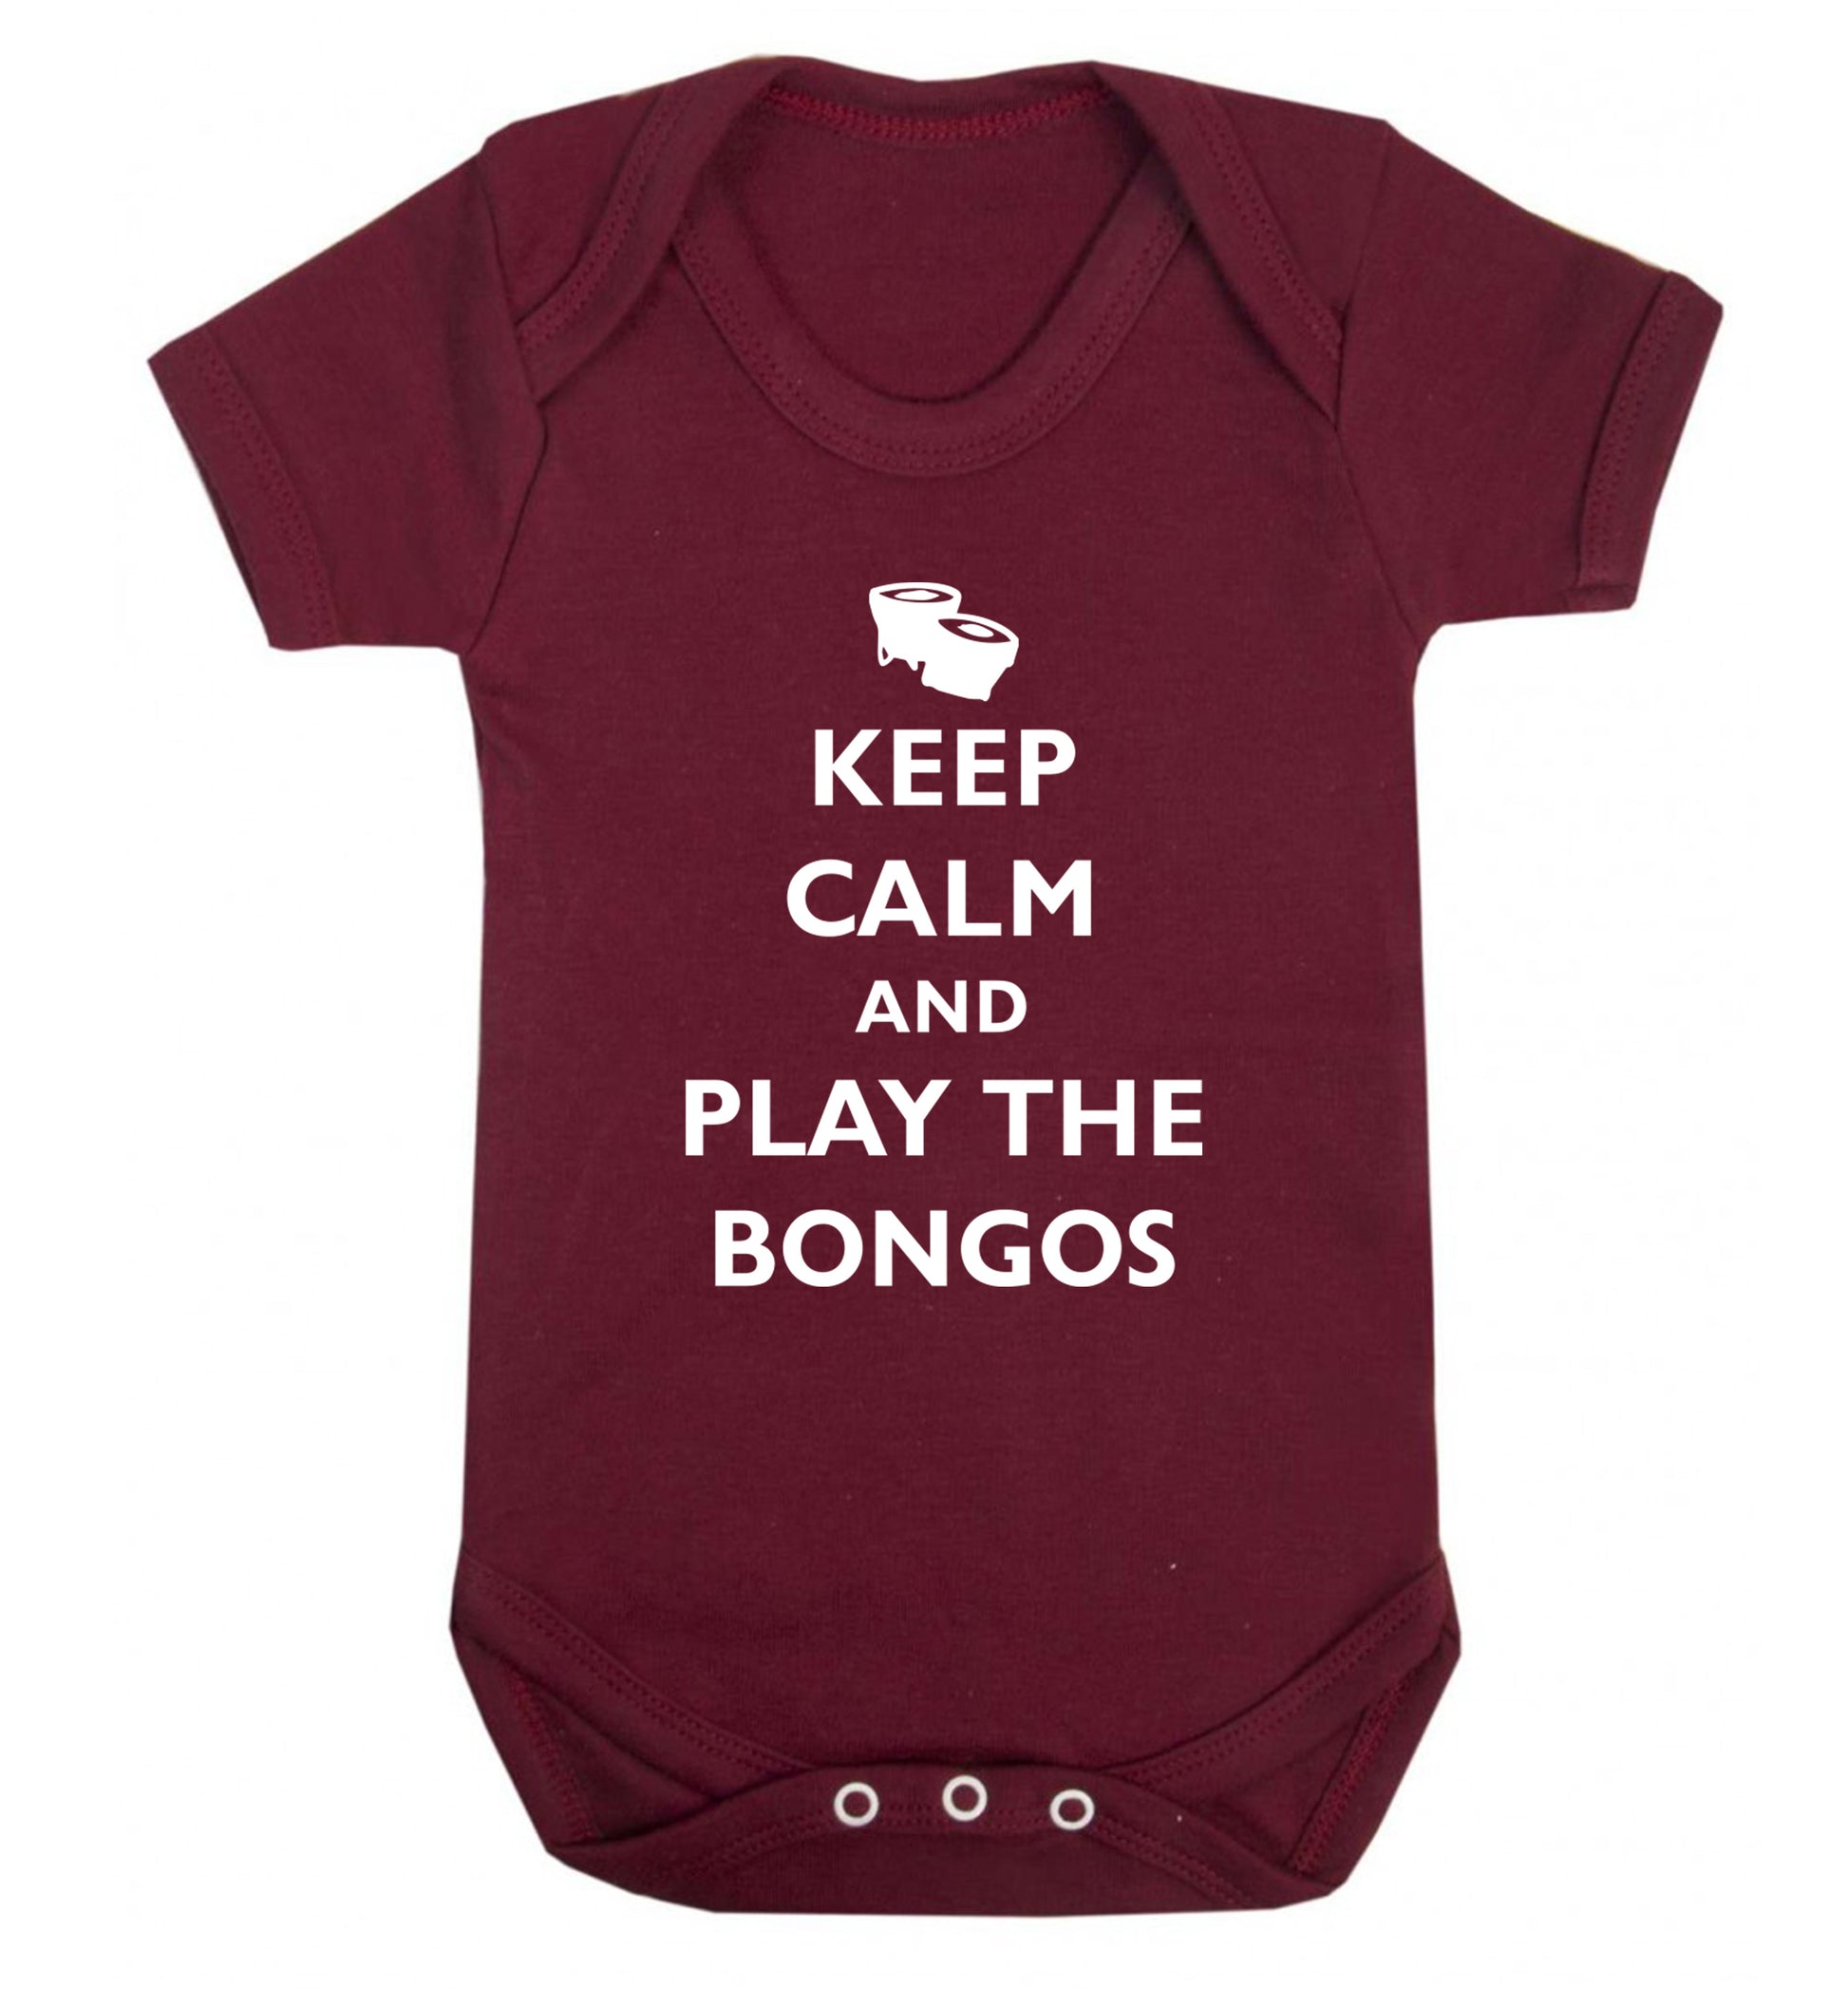 Keep calm and play the bongos Baby Vest maroon 18-24 months